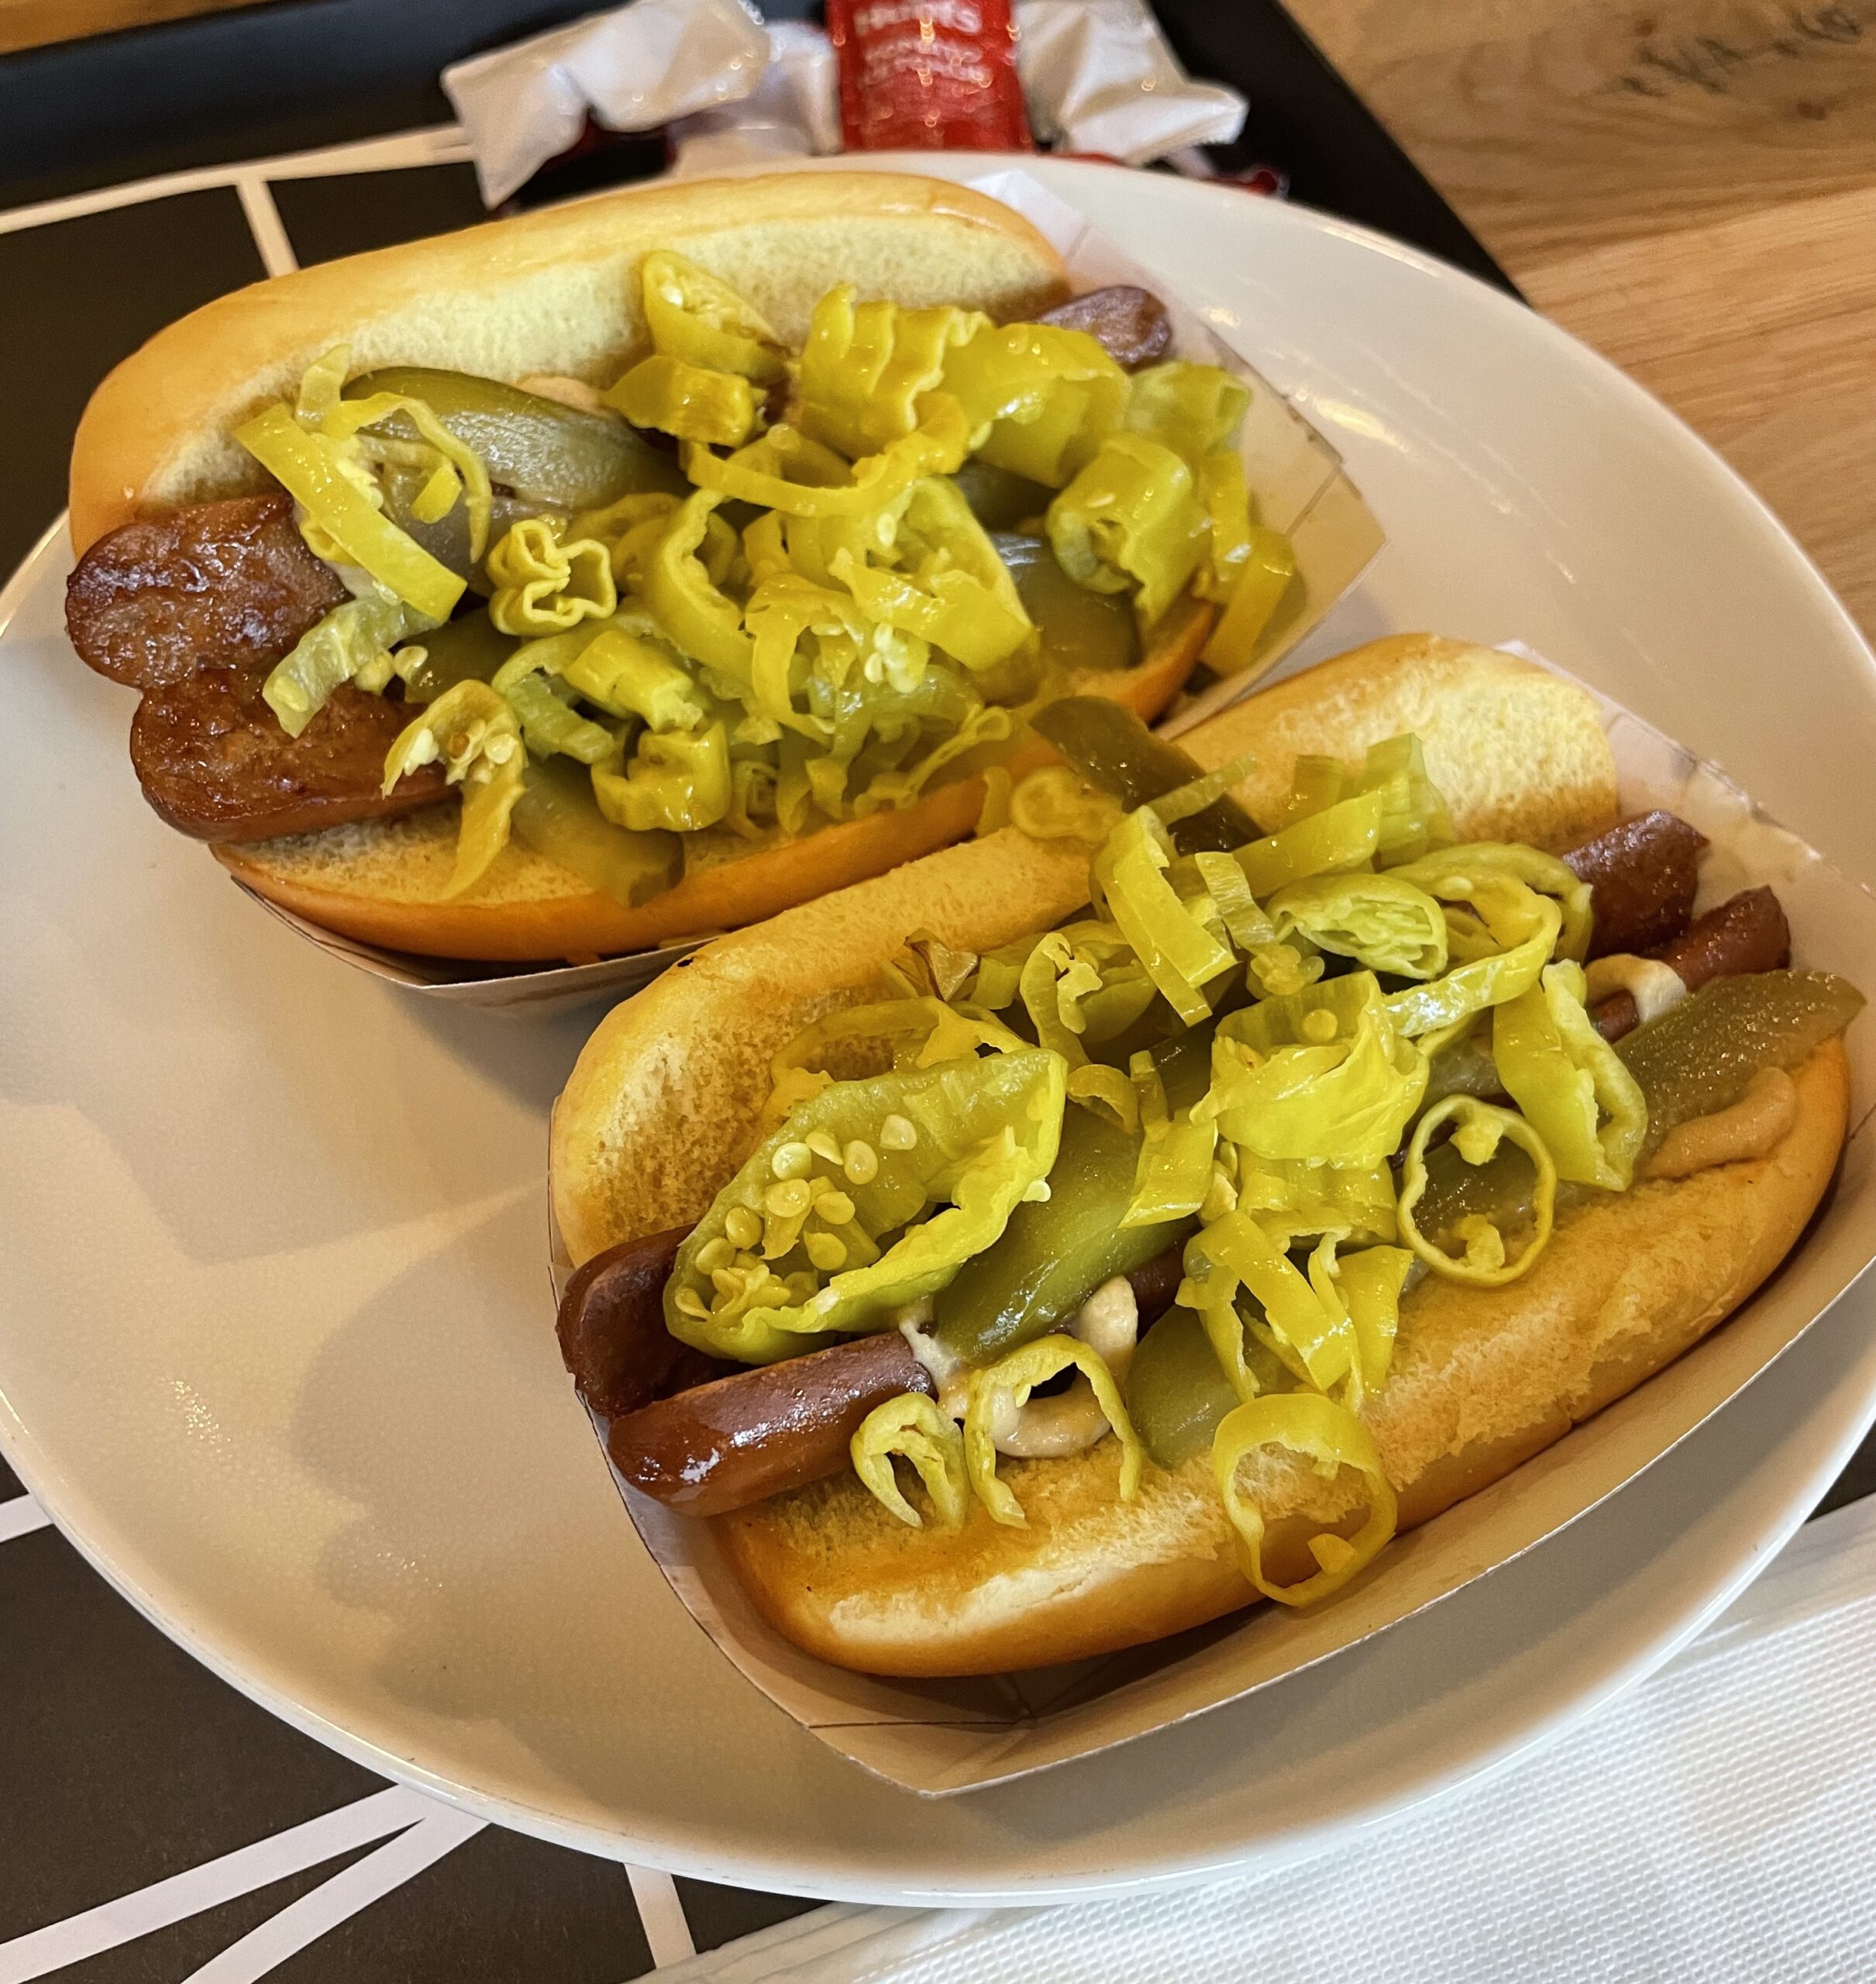 Crif Dogs Veggie Hot Dog open-faced on the bun with peppers